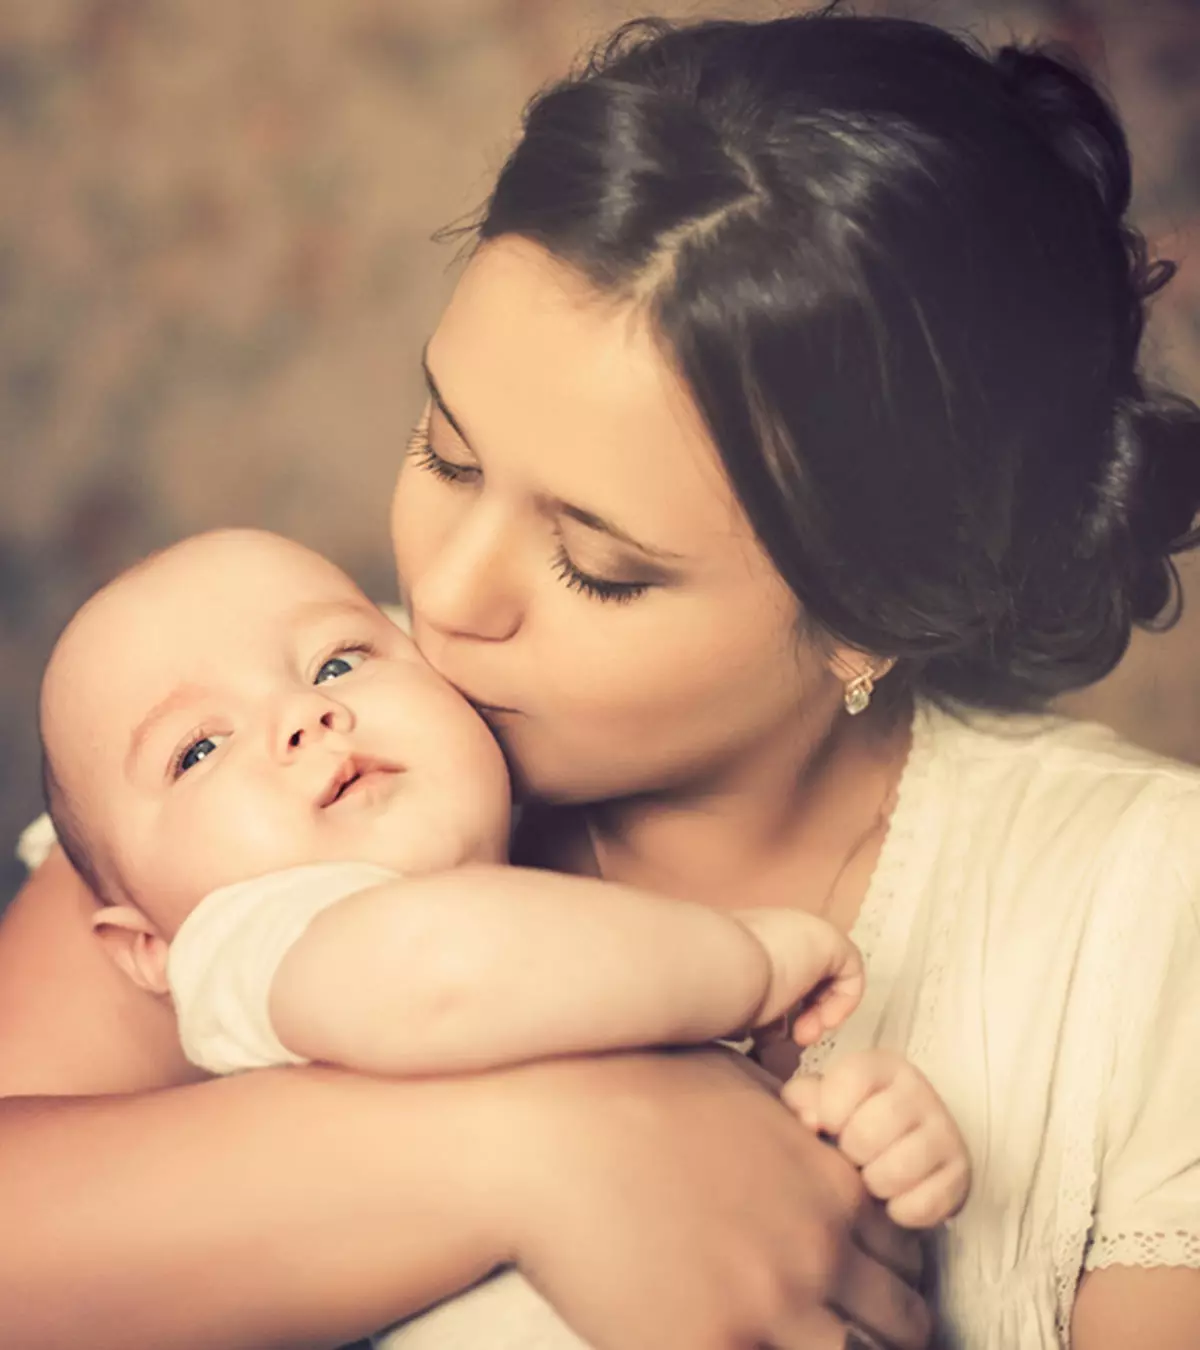 7 Moms Share The Hardest Part Of Early Motherhood